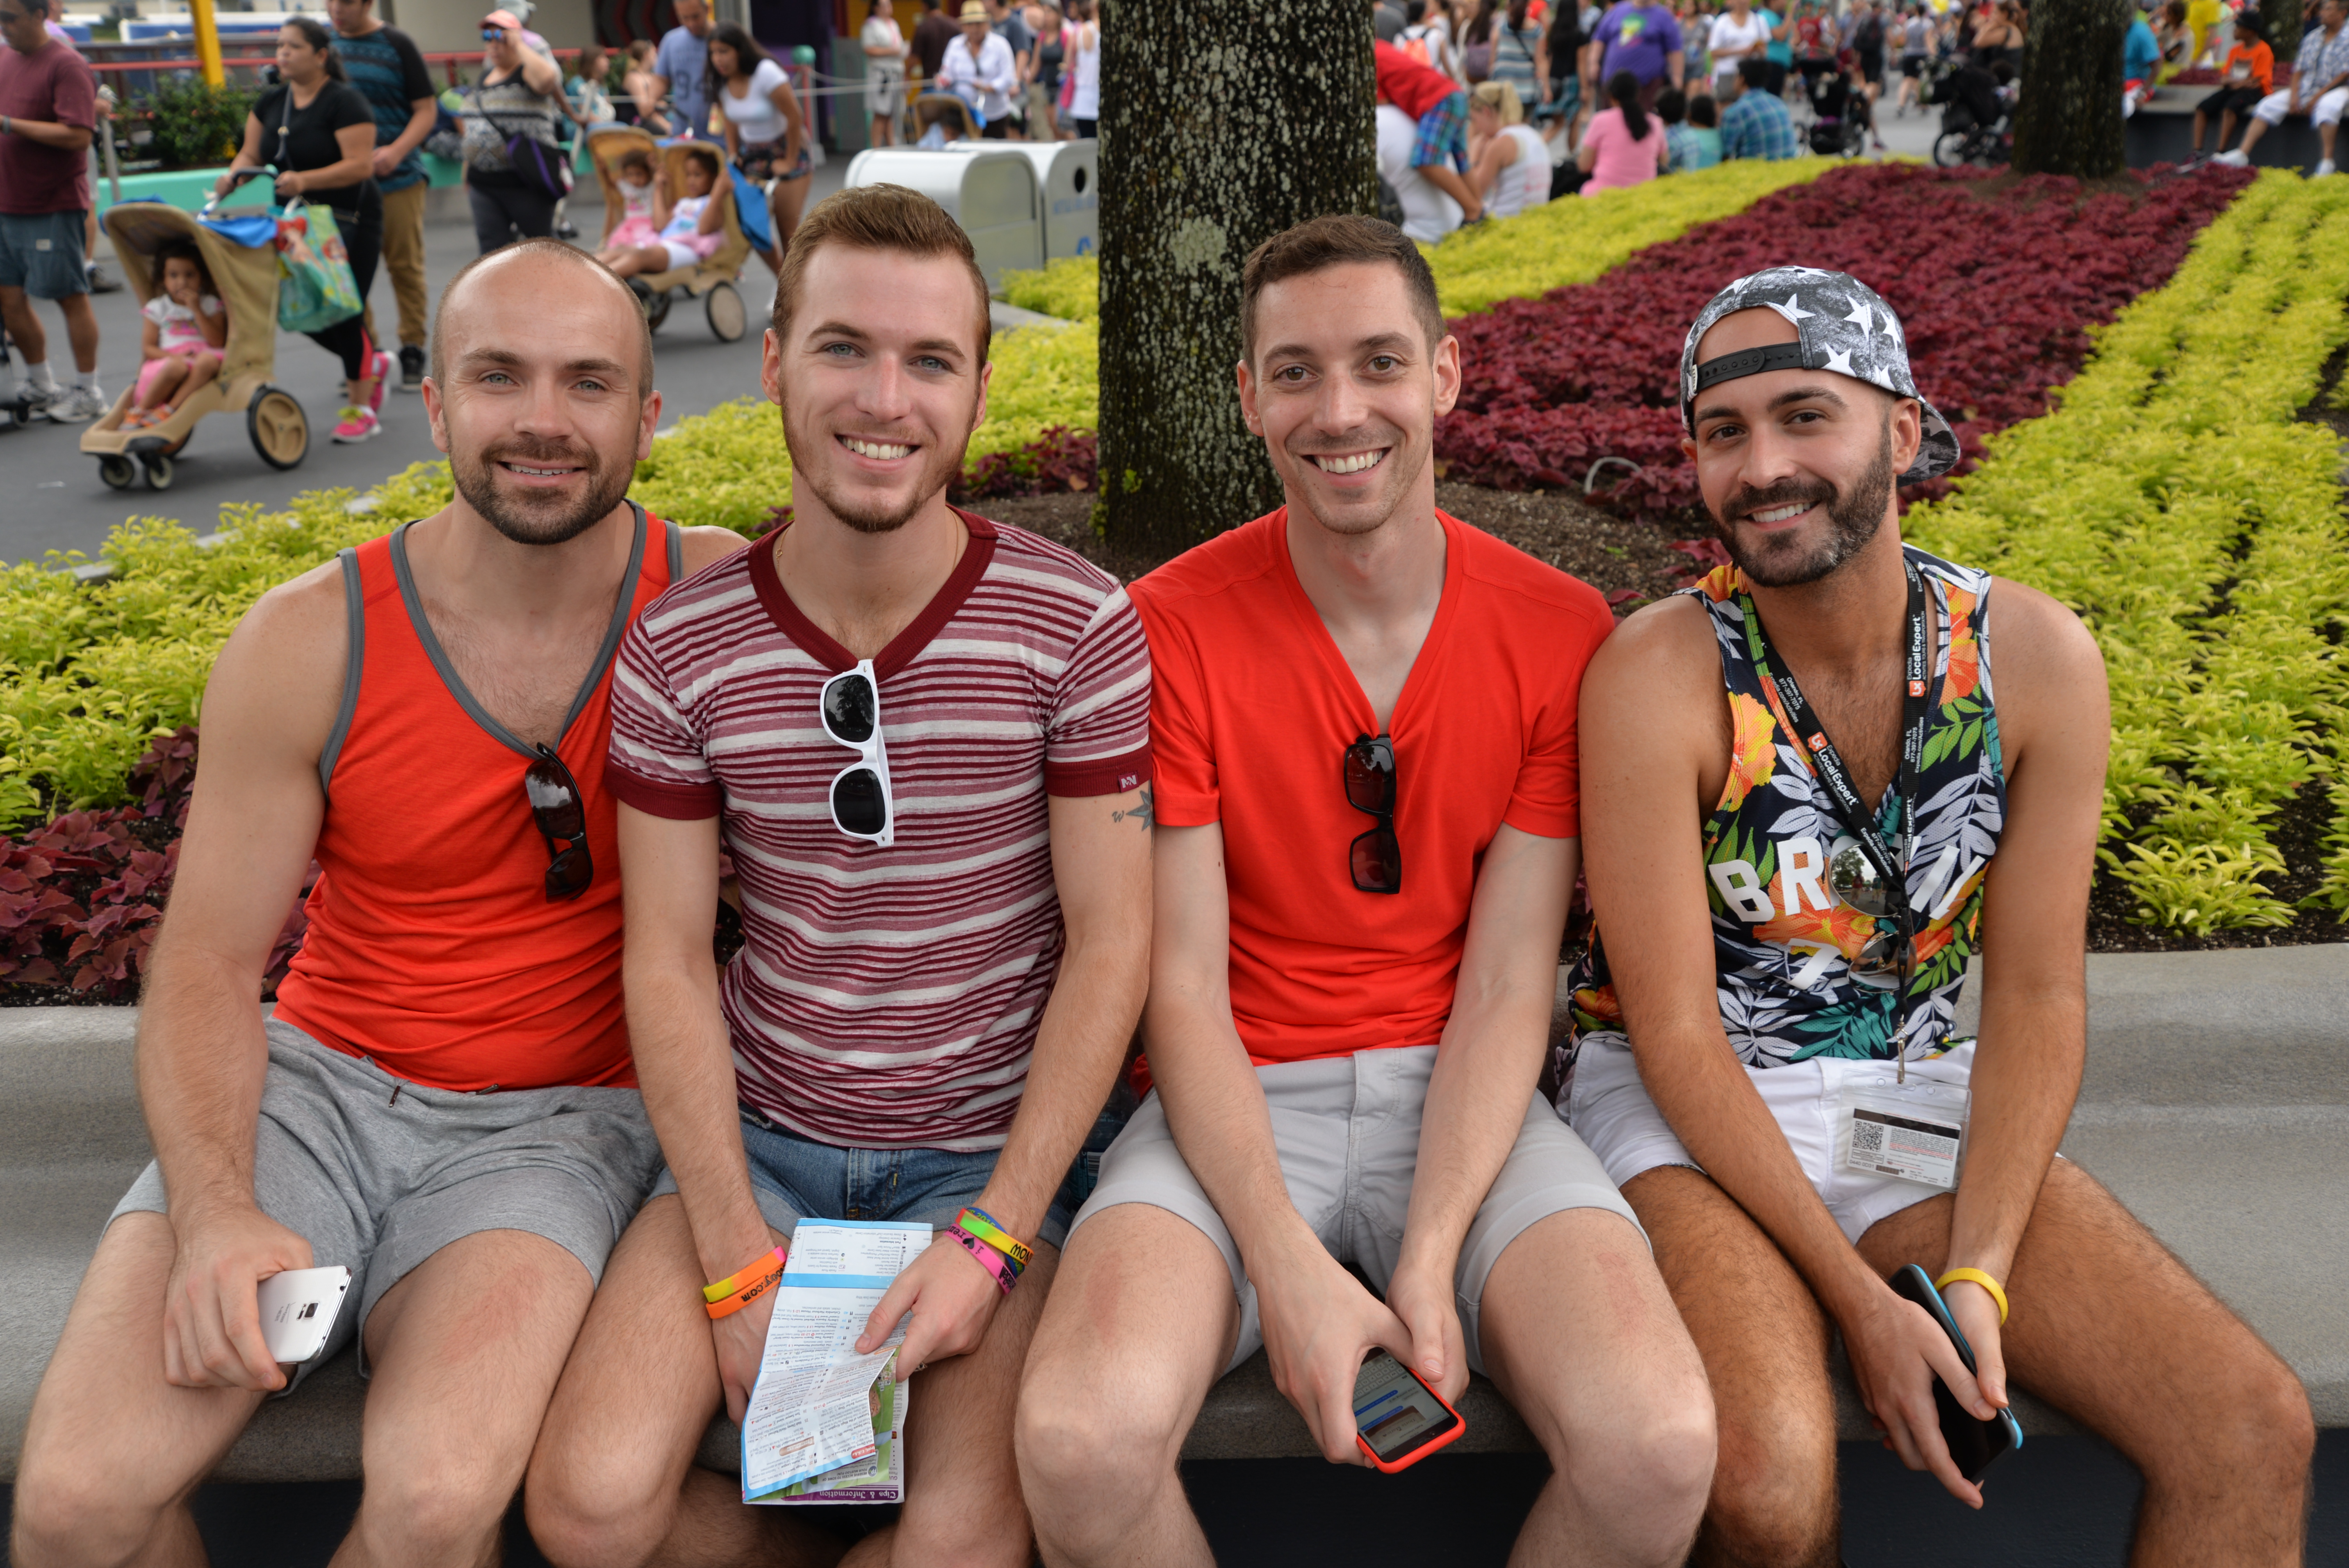 Four men sit on a bench at a GayDays event.